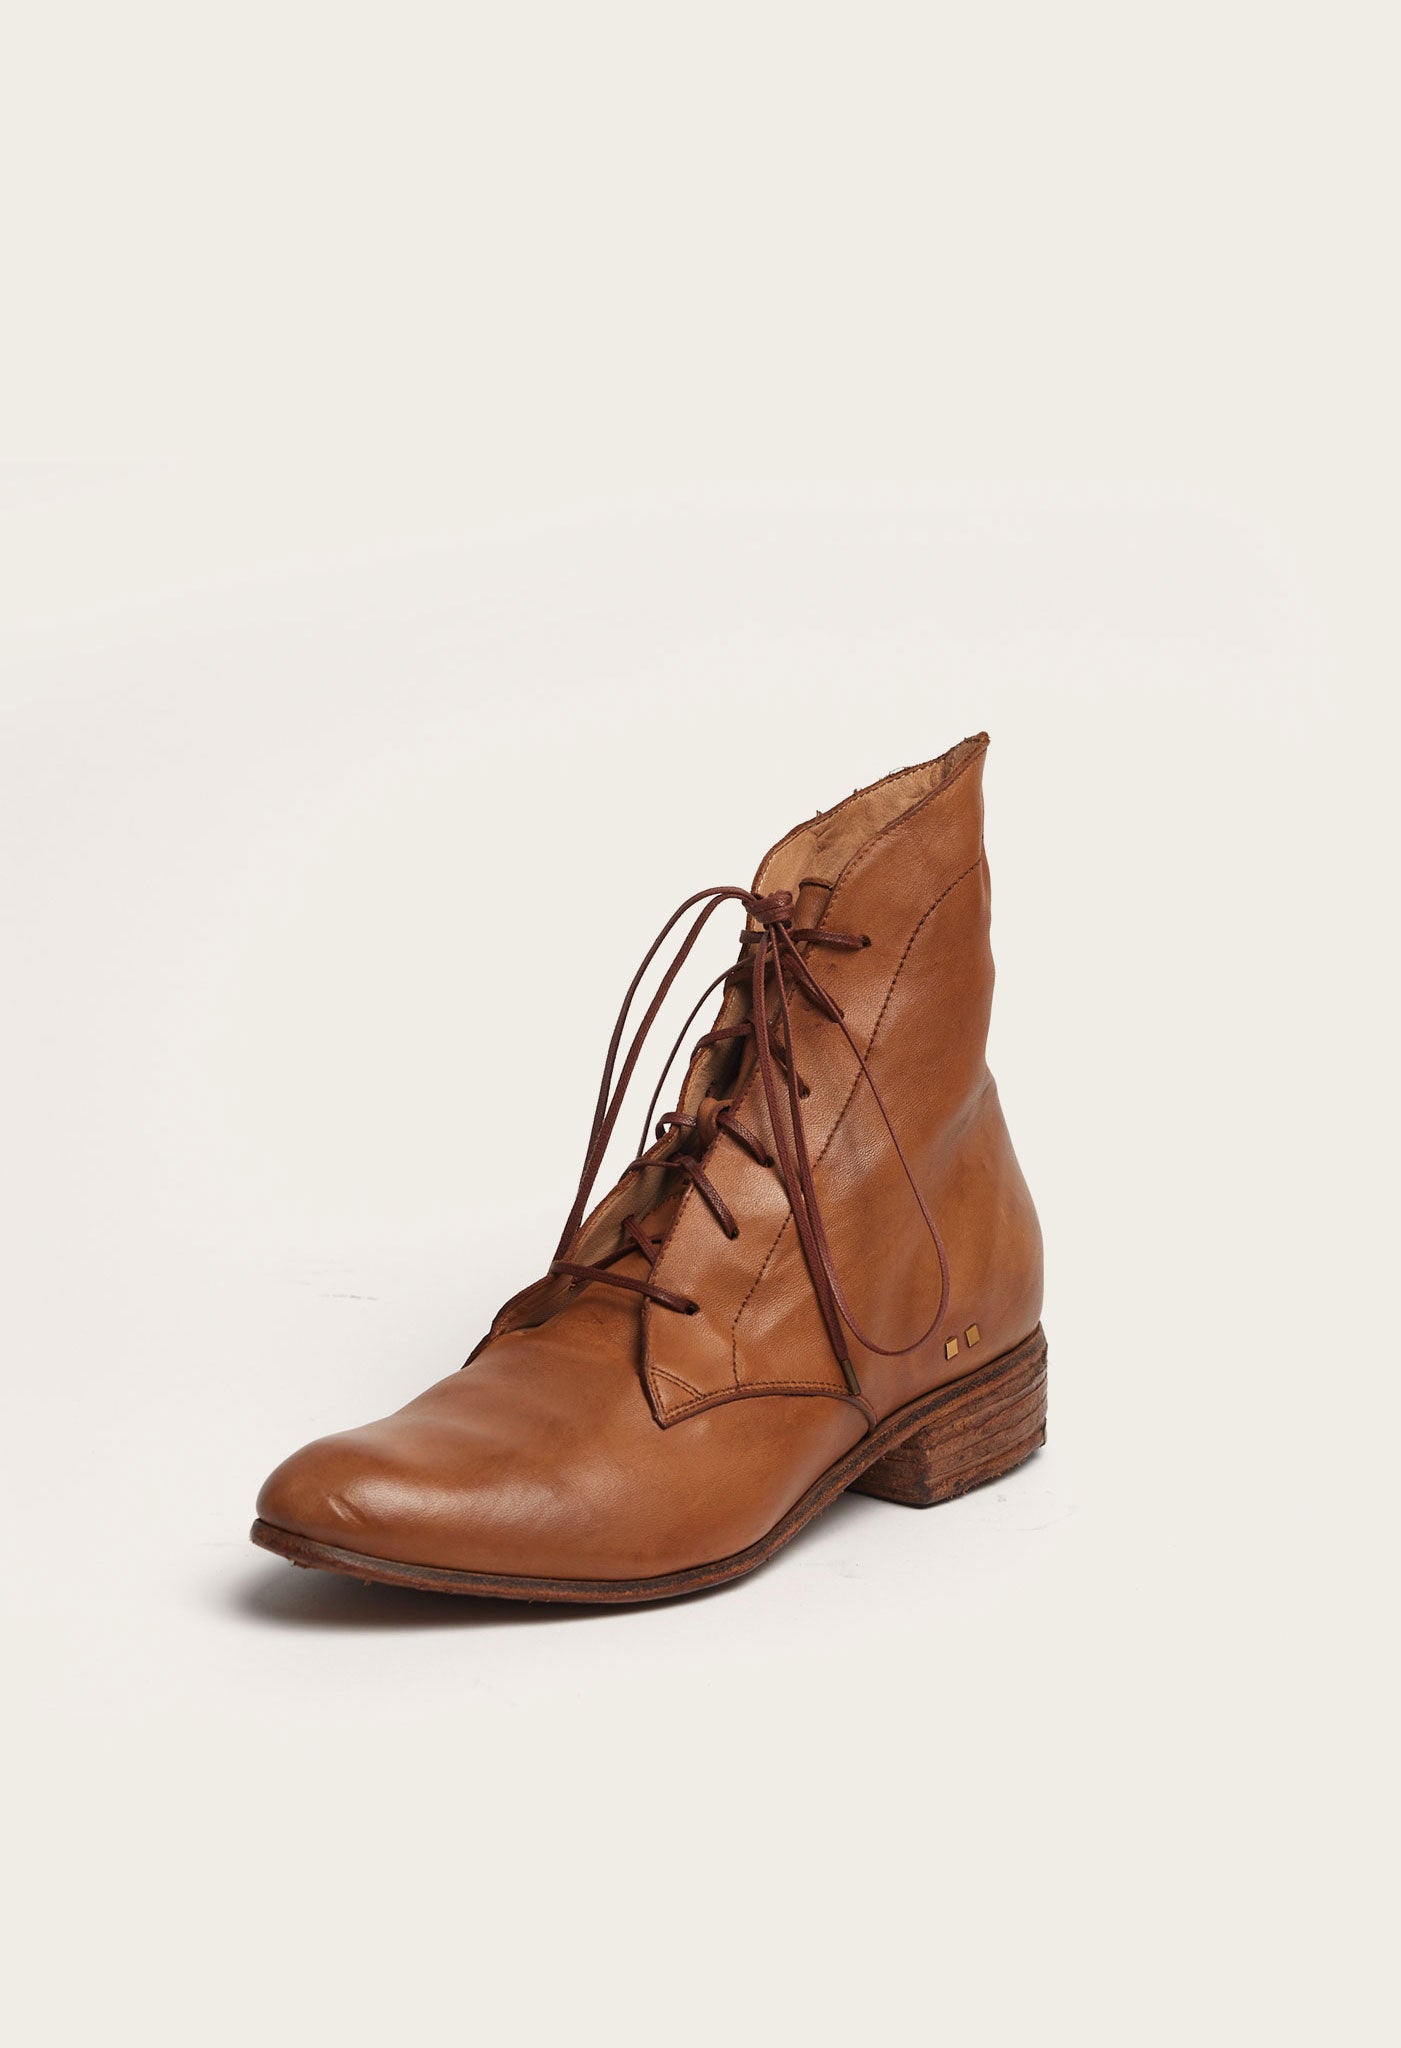 The Women's Mansfield: Tobacco Leather